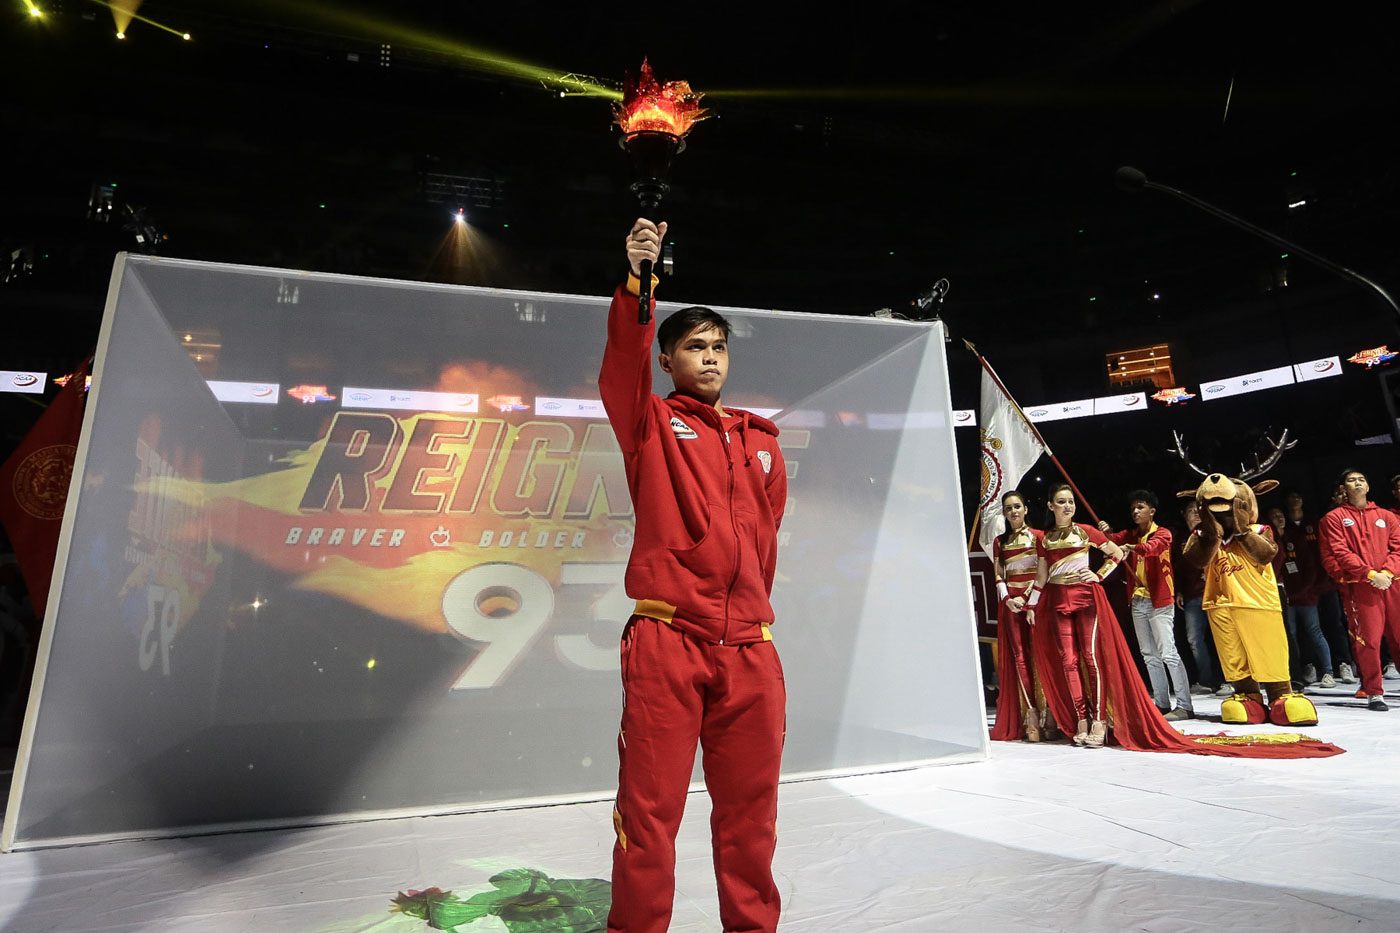 TORCH BEARER. Ryan Costelo holds the torch before the 10 participating teams in the tournament. Photo by Josh Albelda/Rappler  